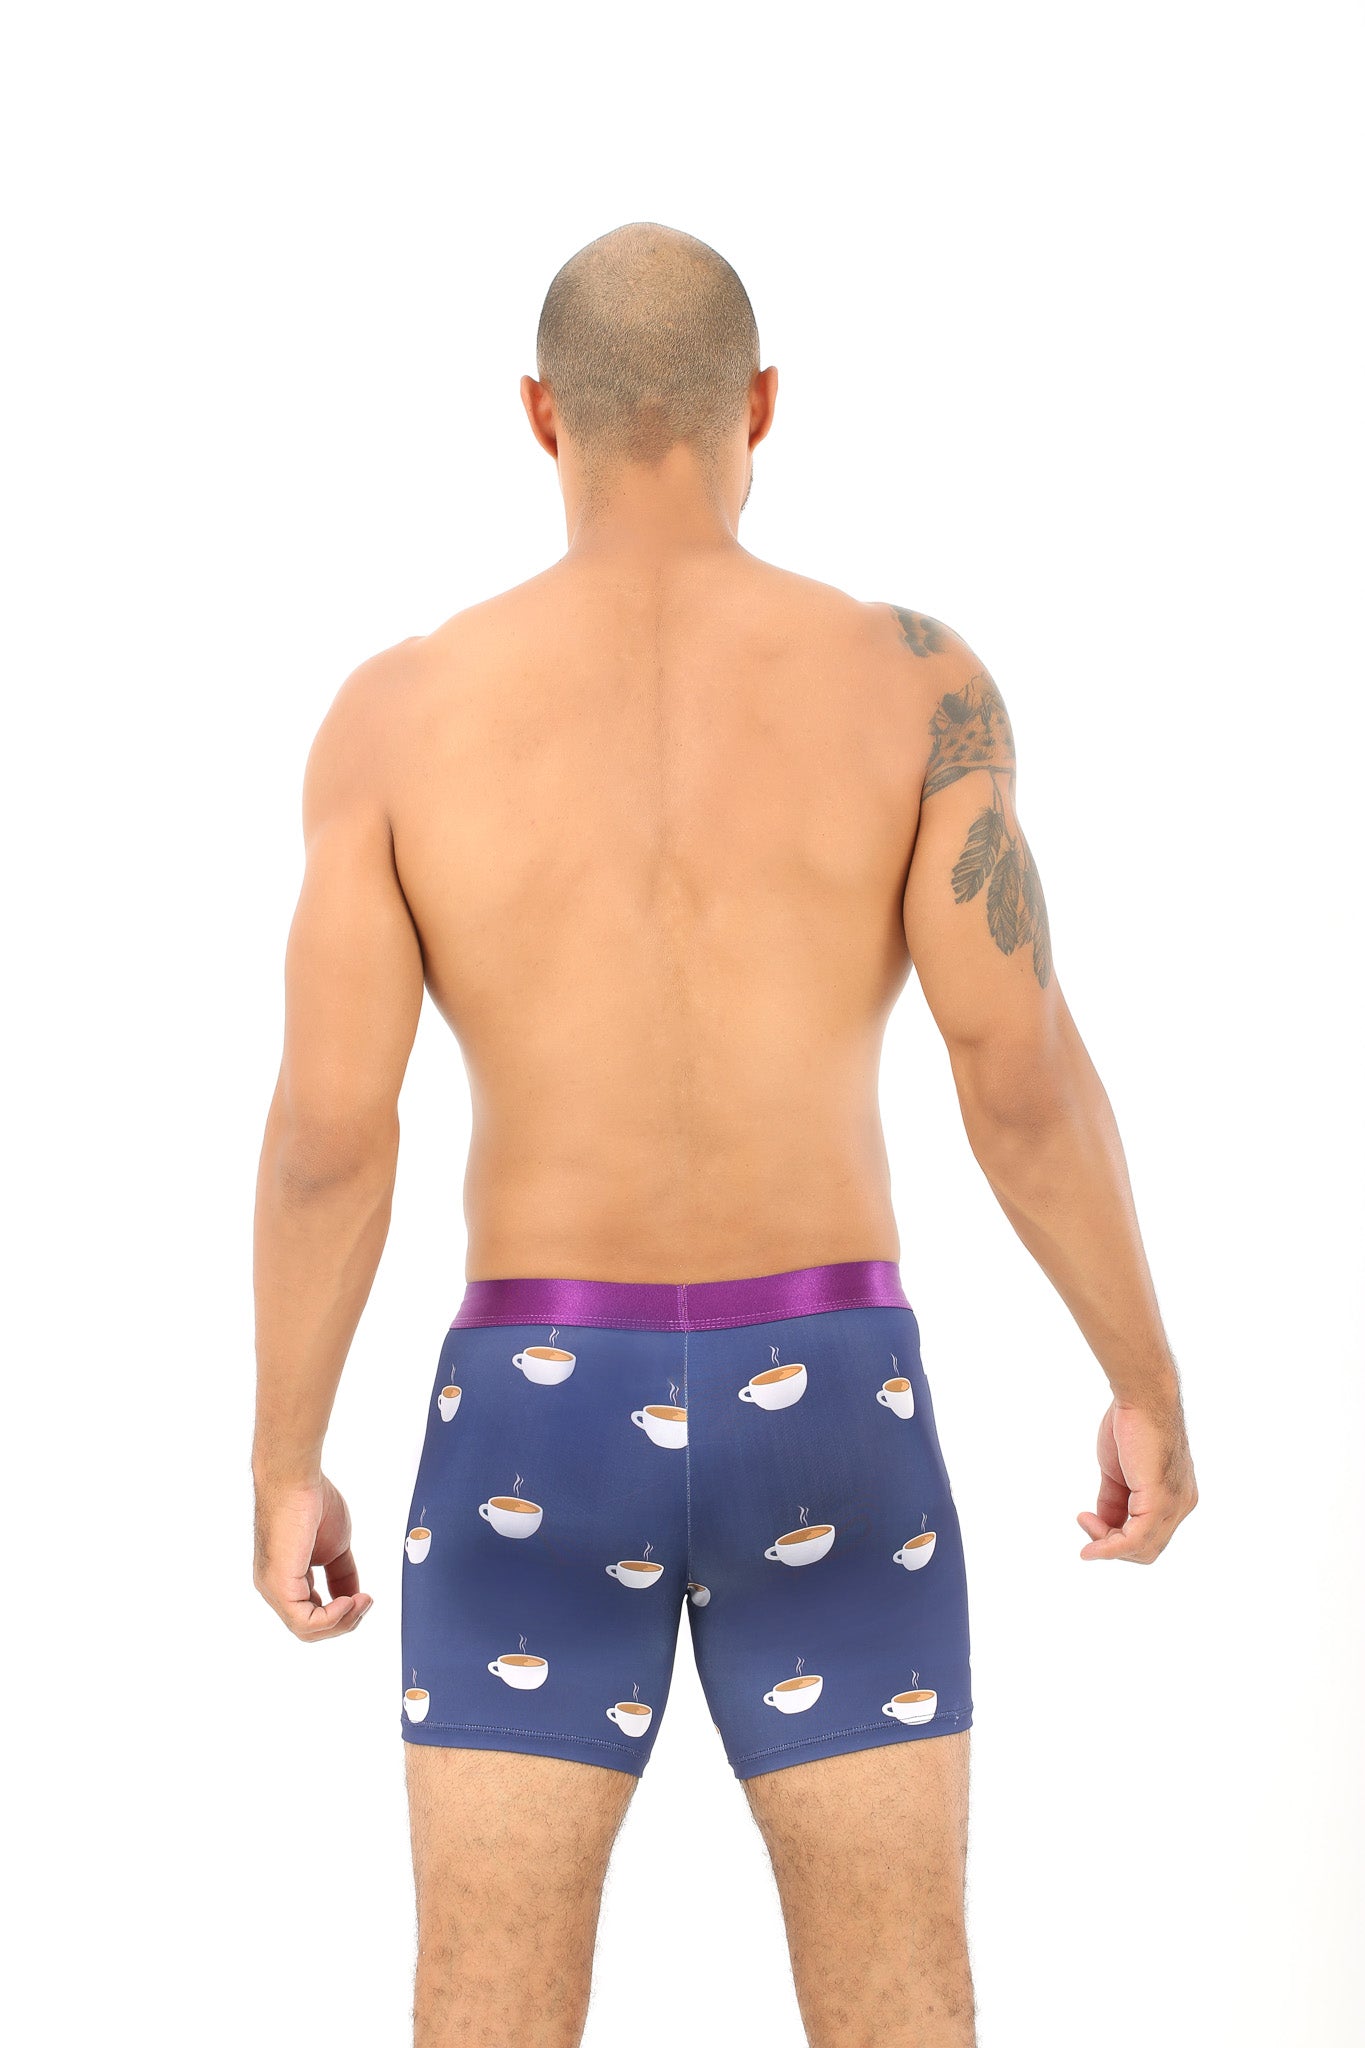 The back of a man wearing Coffee Underwear with maximum coziness and cupcakes on it.